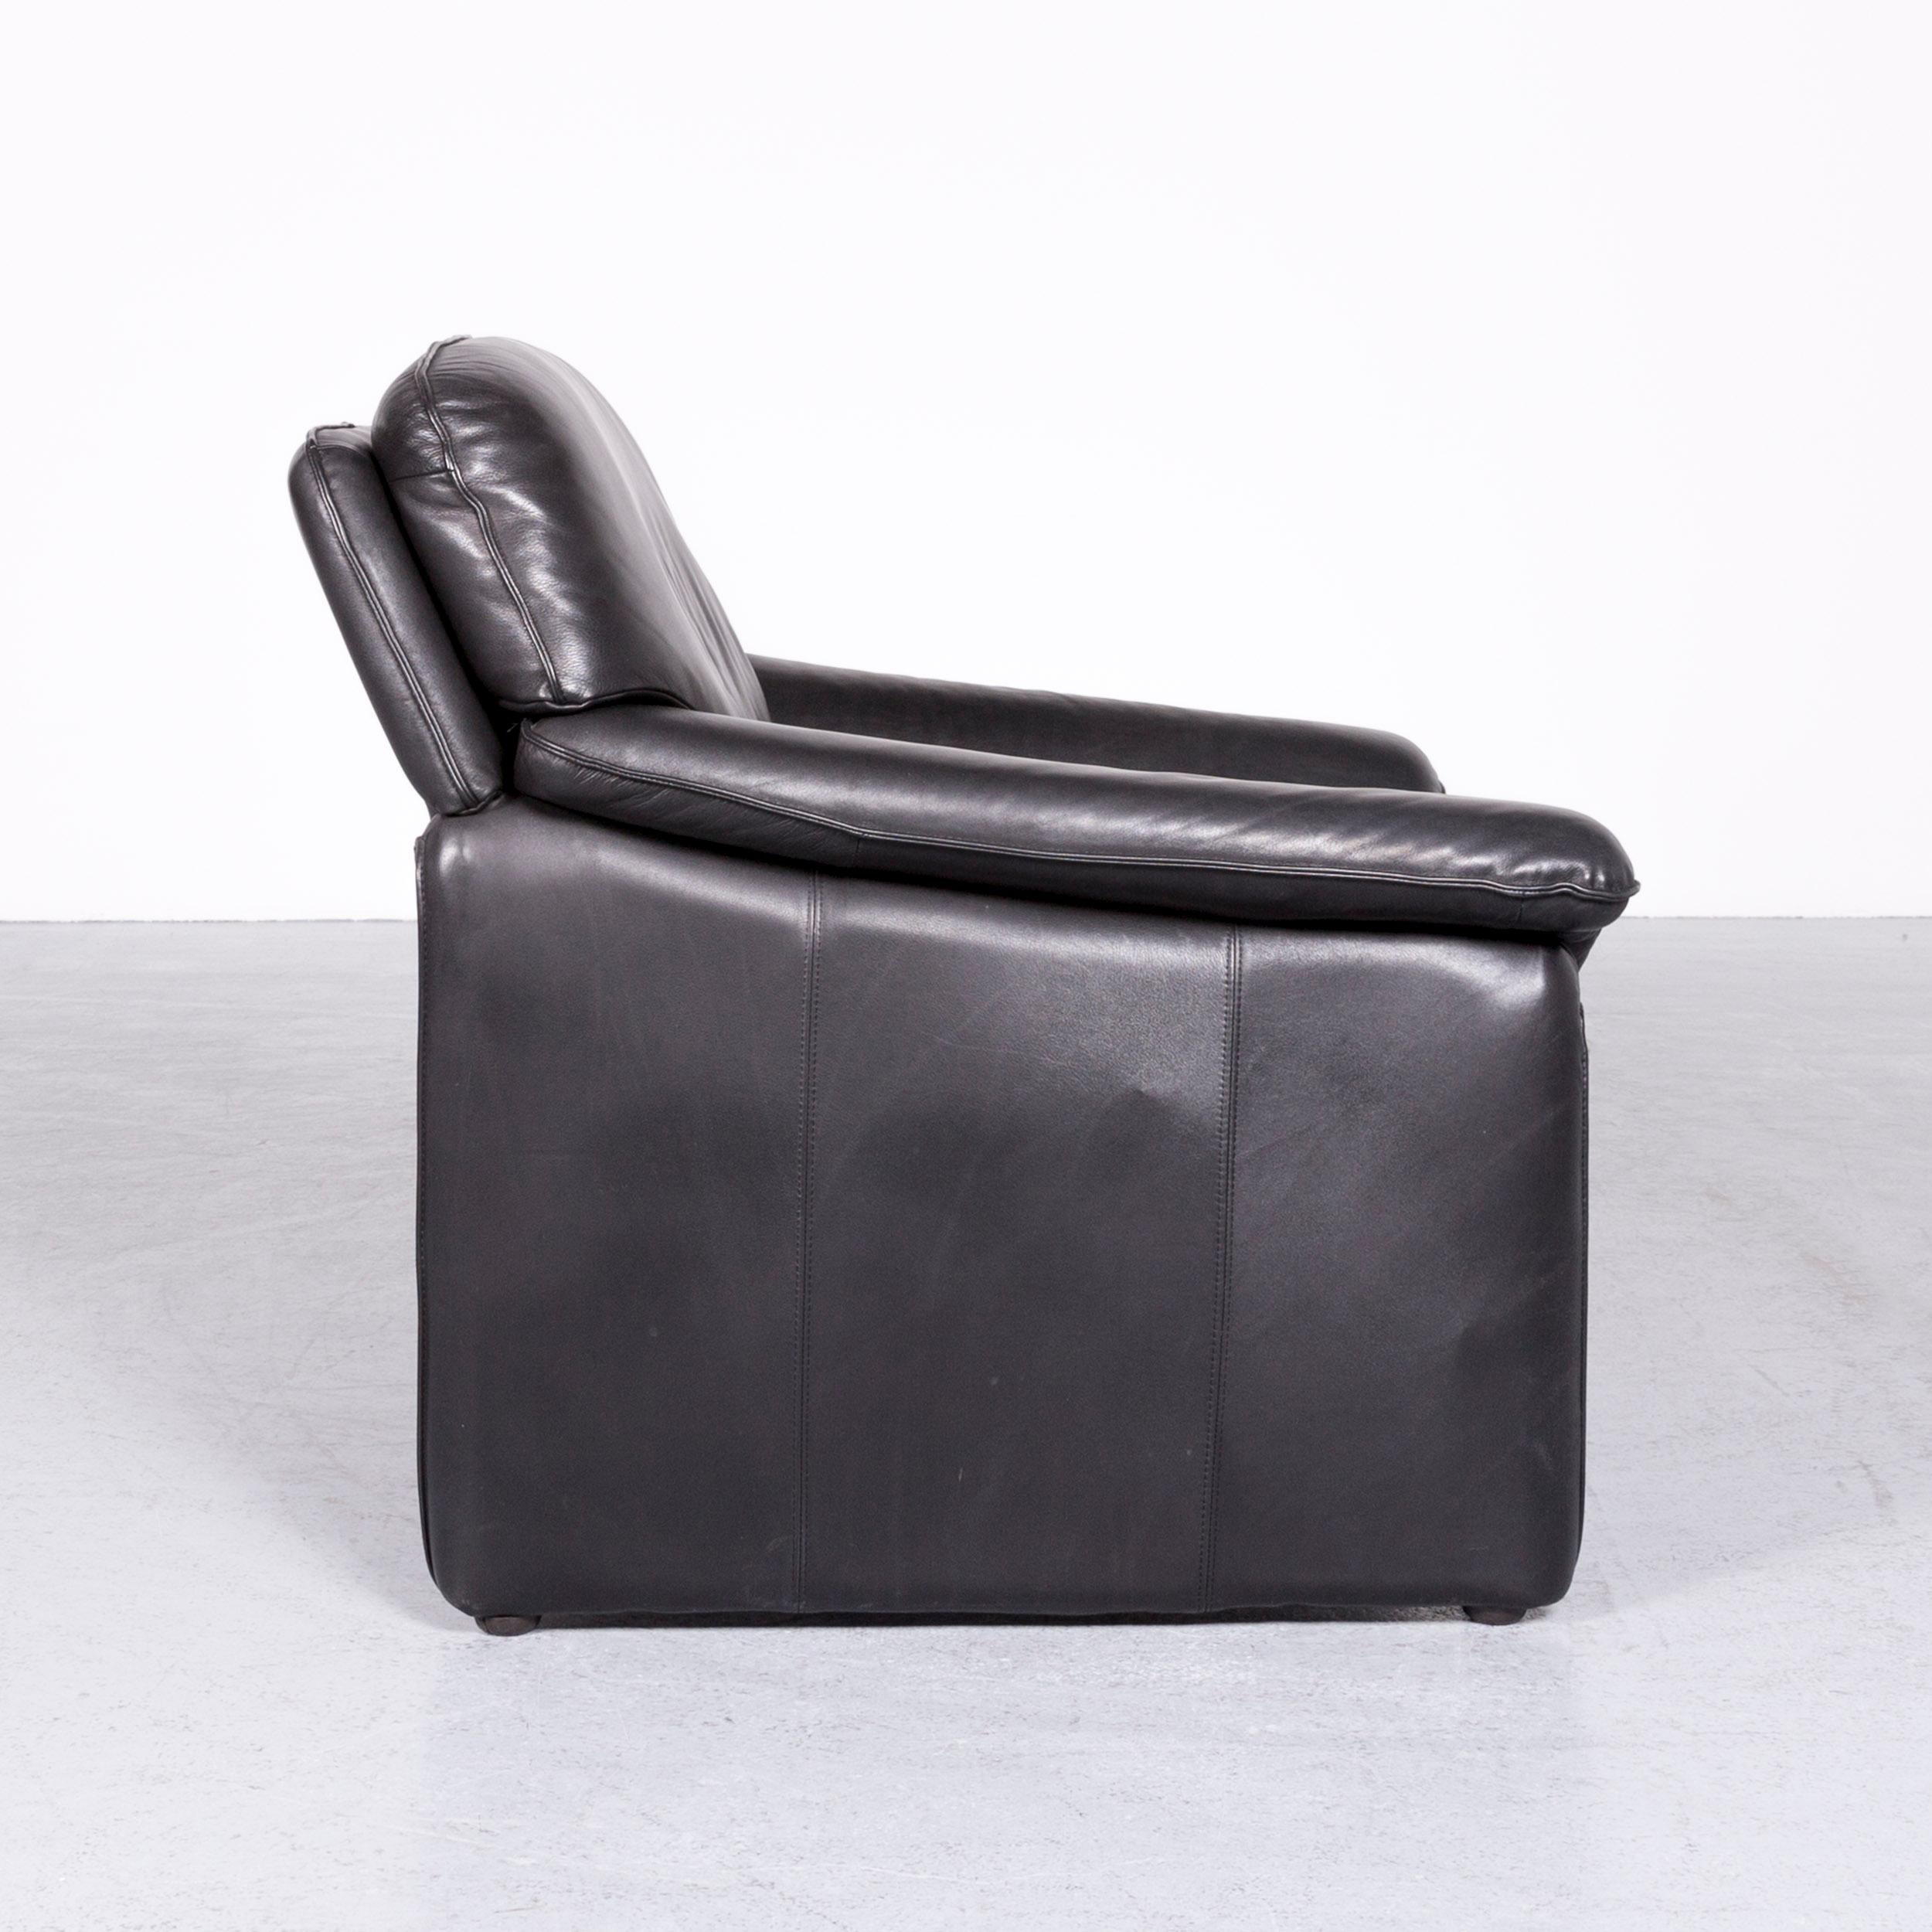 Laauser Atlanta Designer Armchair Leather Black One-Seat Couch Modern For Sale 1